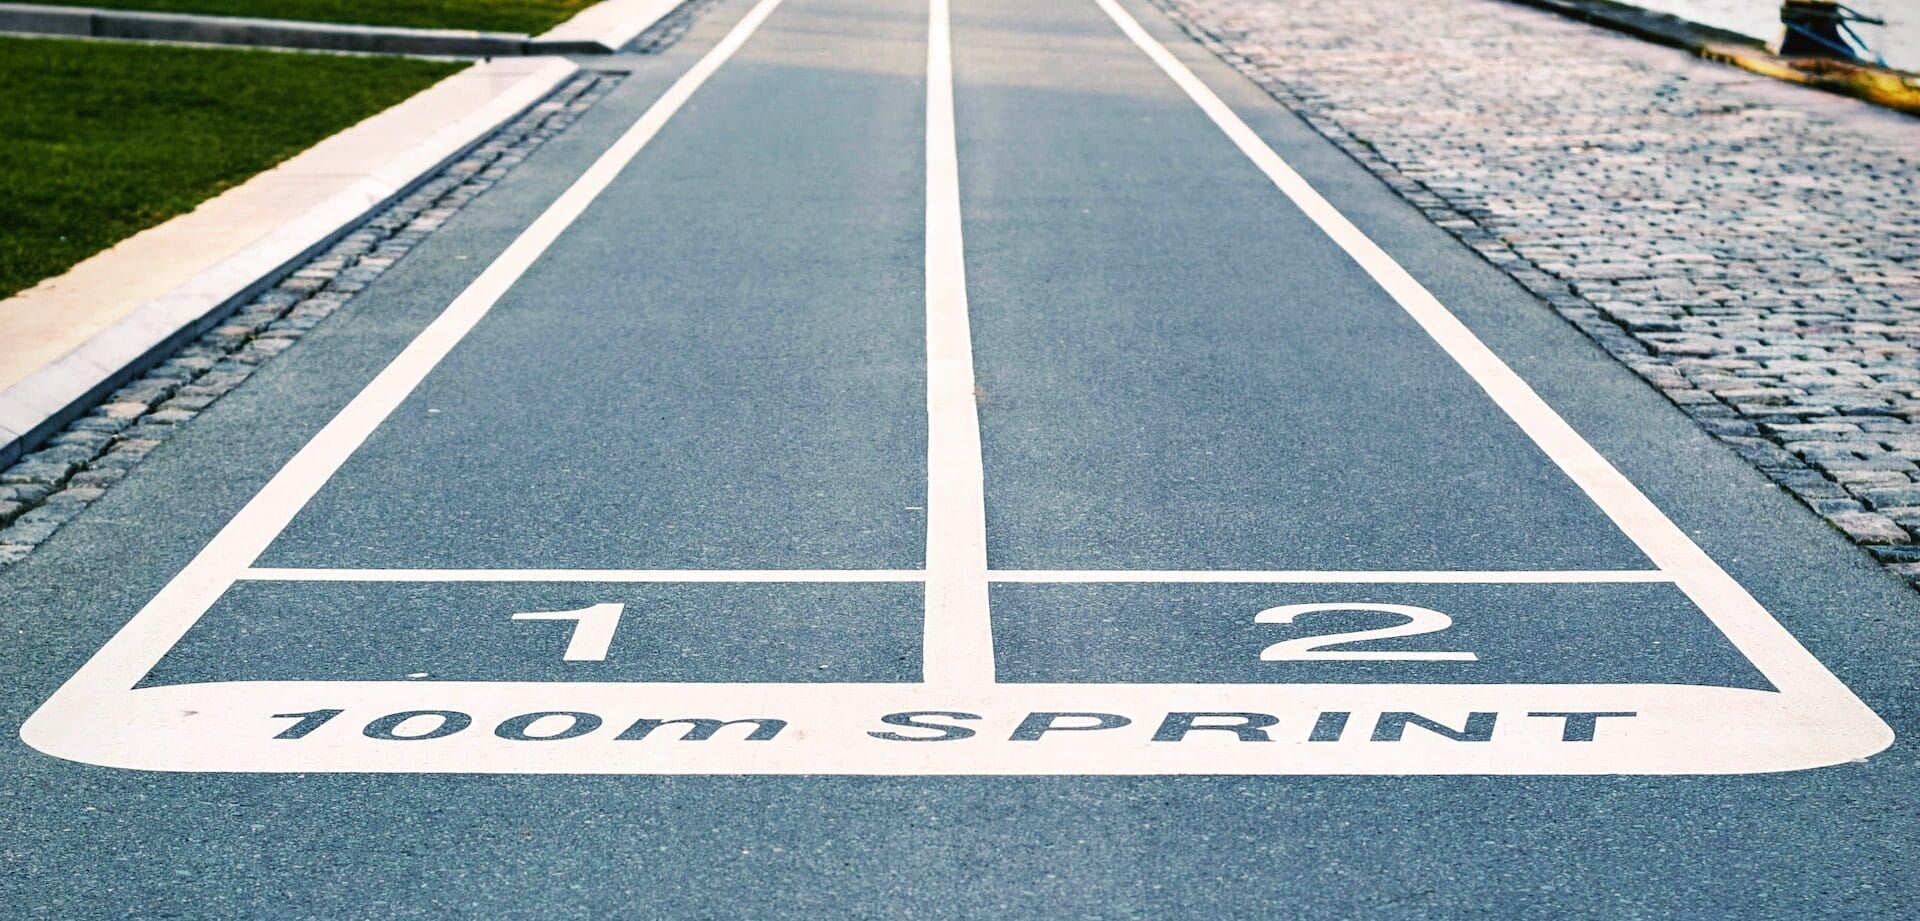 A running track with the word sprint written on it, showcasing the development of a new website using Webflow.